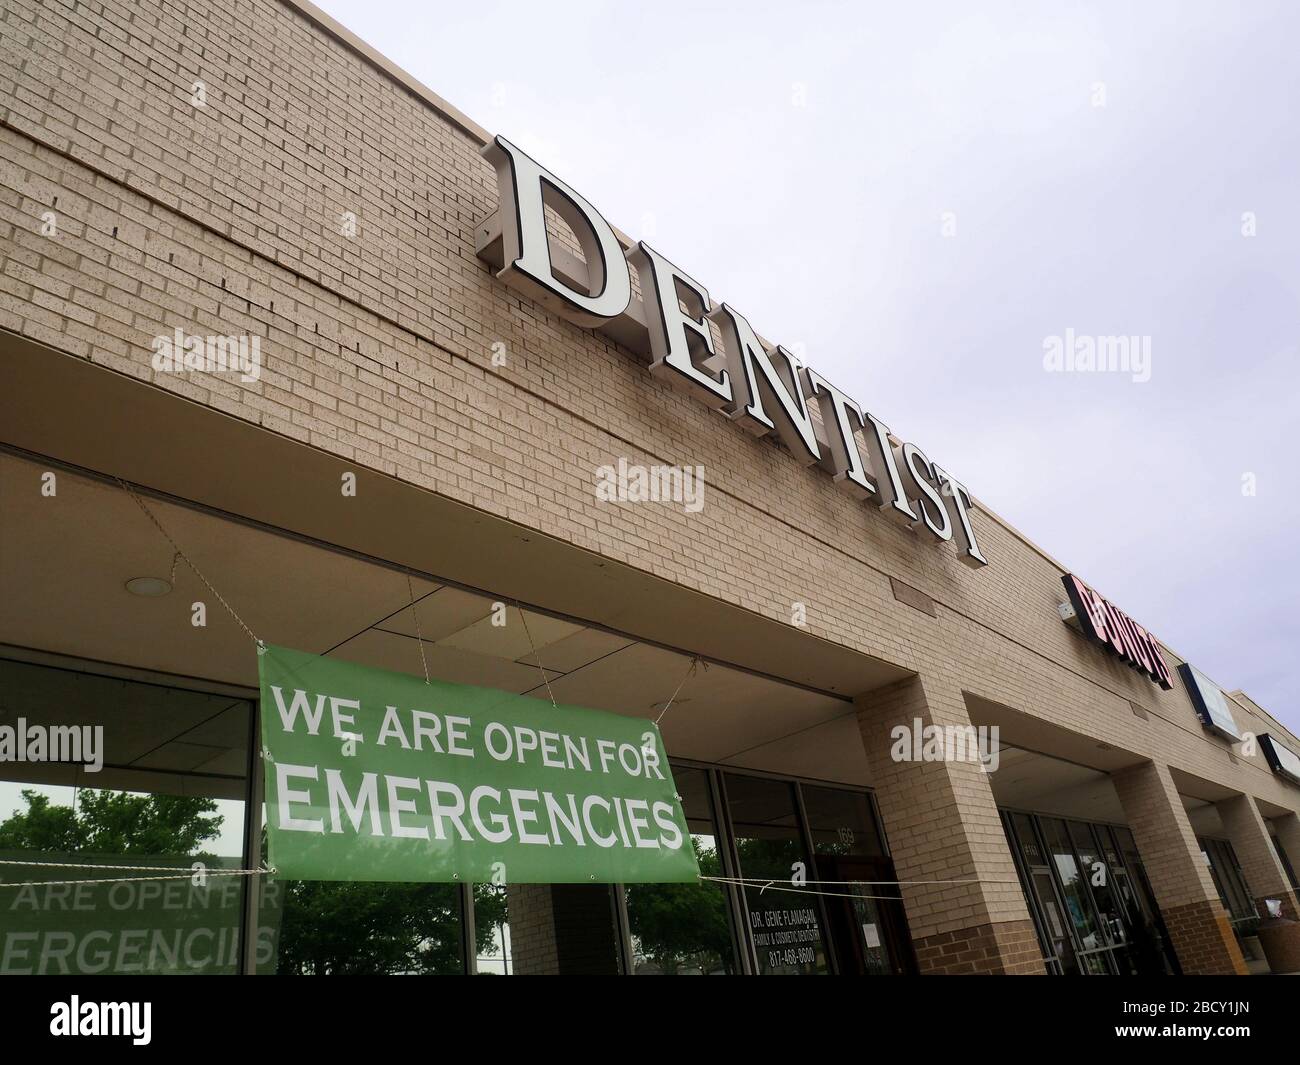 Protection from the Corona virus, at the grocery store people are asked to stay six feet apart and the dentist will only see people if it is an emergency. Stock Photo